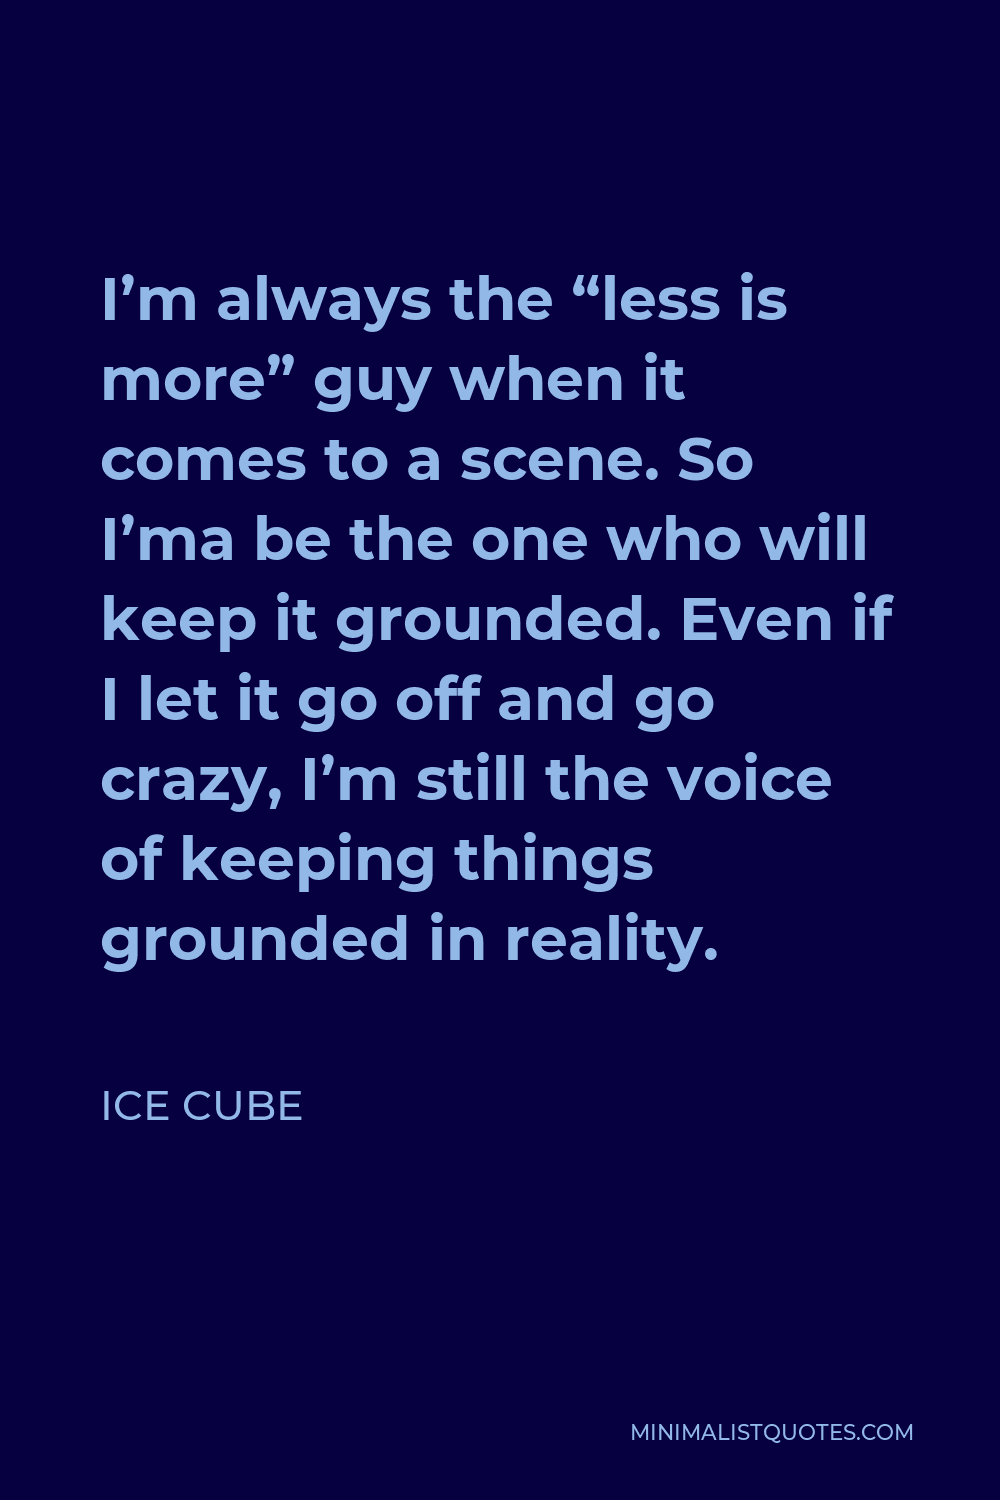 Ice Cube Quote - I’m always the “less is more” guy when it comes to a scene. So I’ma be the one who will keep it grounded. Even if I let it go off and go crazy, I’m still the voice of keeping things grounded in reality.